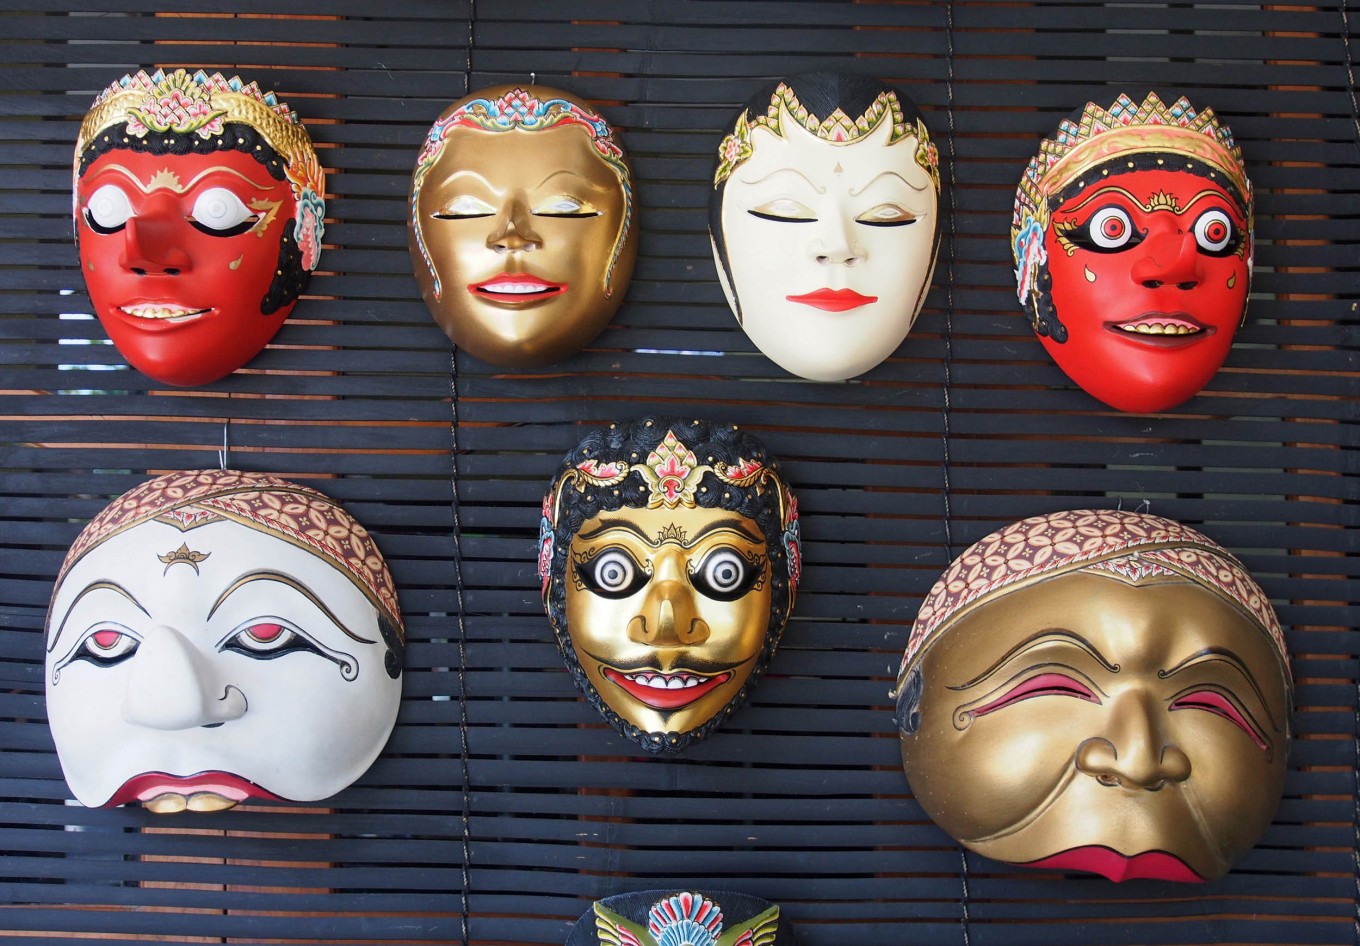  A variety of colorful masks used in dance performances.